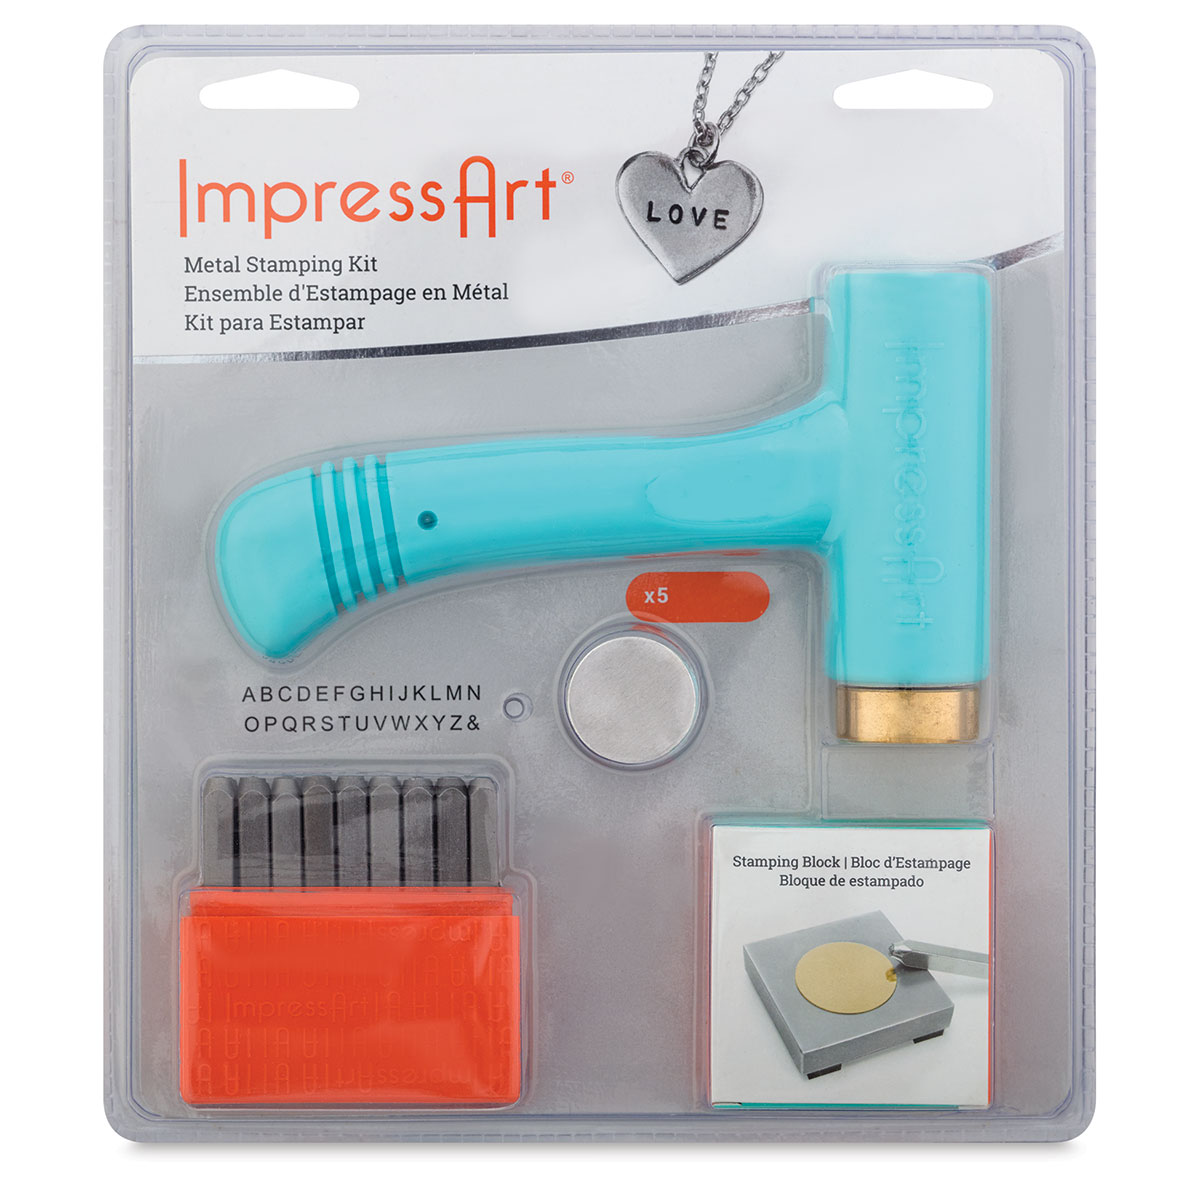 ImpressArt - Metal Stamping Kit, Tools & Supplies for Metal Hand Stamping Craft Projects, DIY Jewelry Making & Keepsakes (Homeroom, Deluxe Kit)